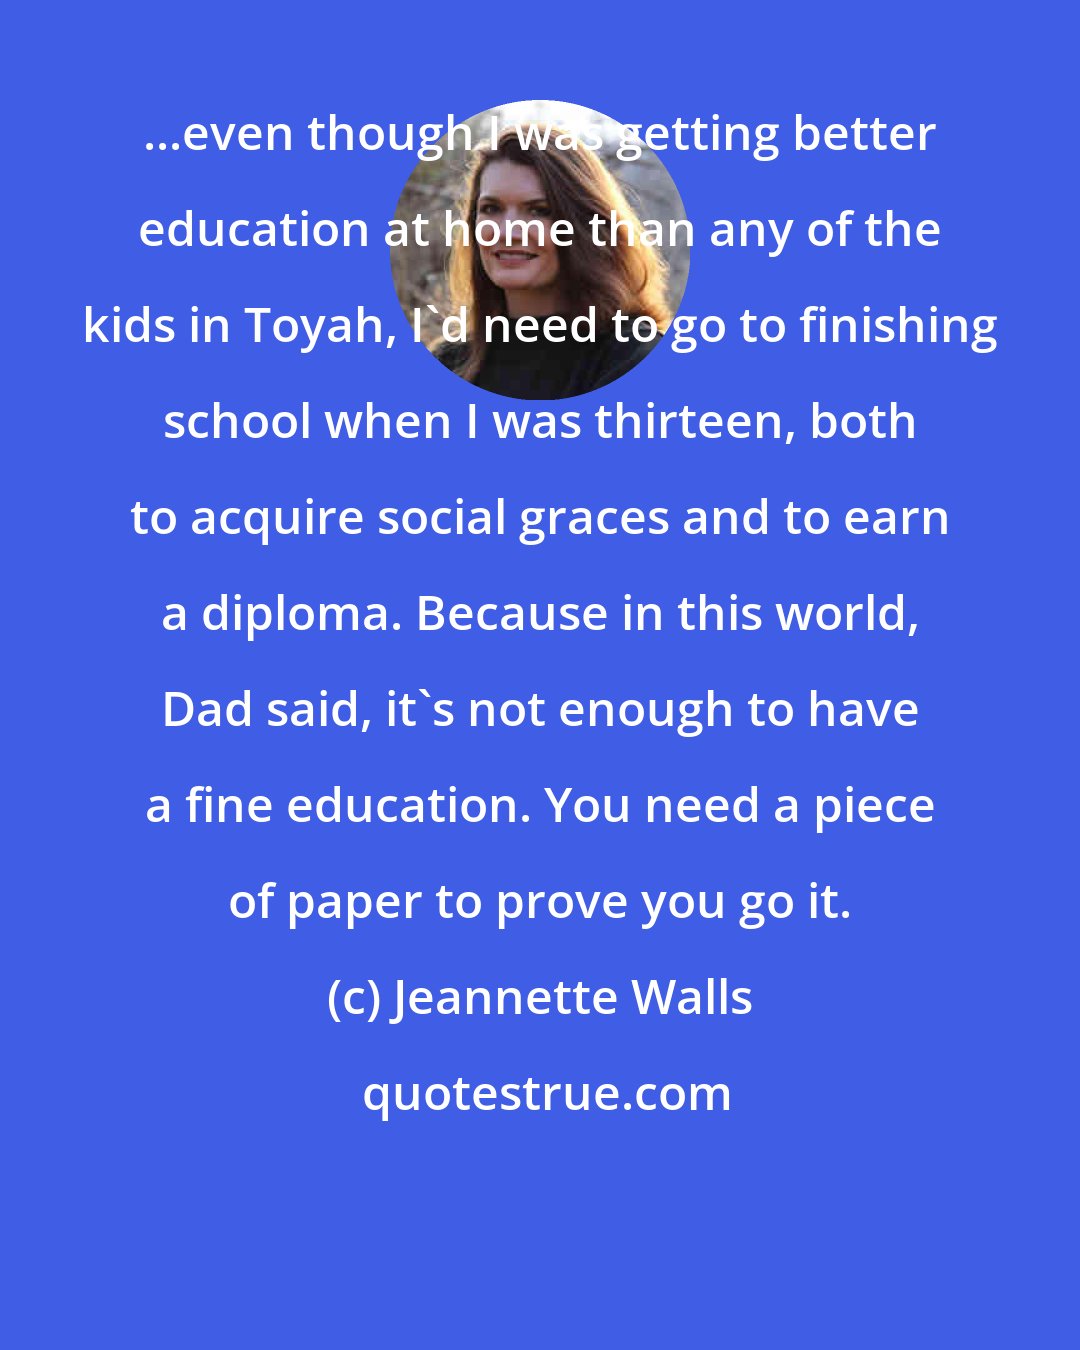 Jeannette Walls: ...even though I was getting better education at home than any of the kids in Toyah, I'd need to go to finishing school when I was thirteen, both to acquire social graces and to earn a diploma. Because in this world, Dad said, it's not enough to have a fine education. You need a piece of paper to prove you go it.